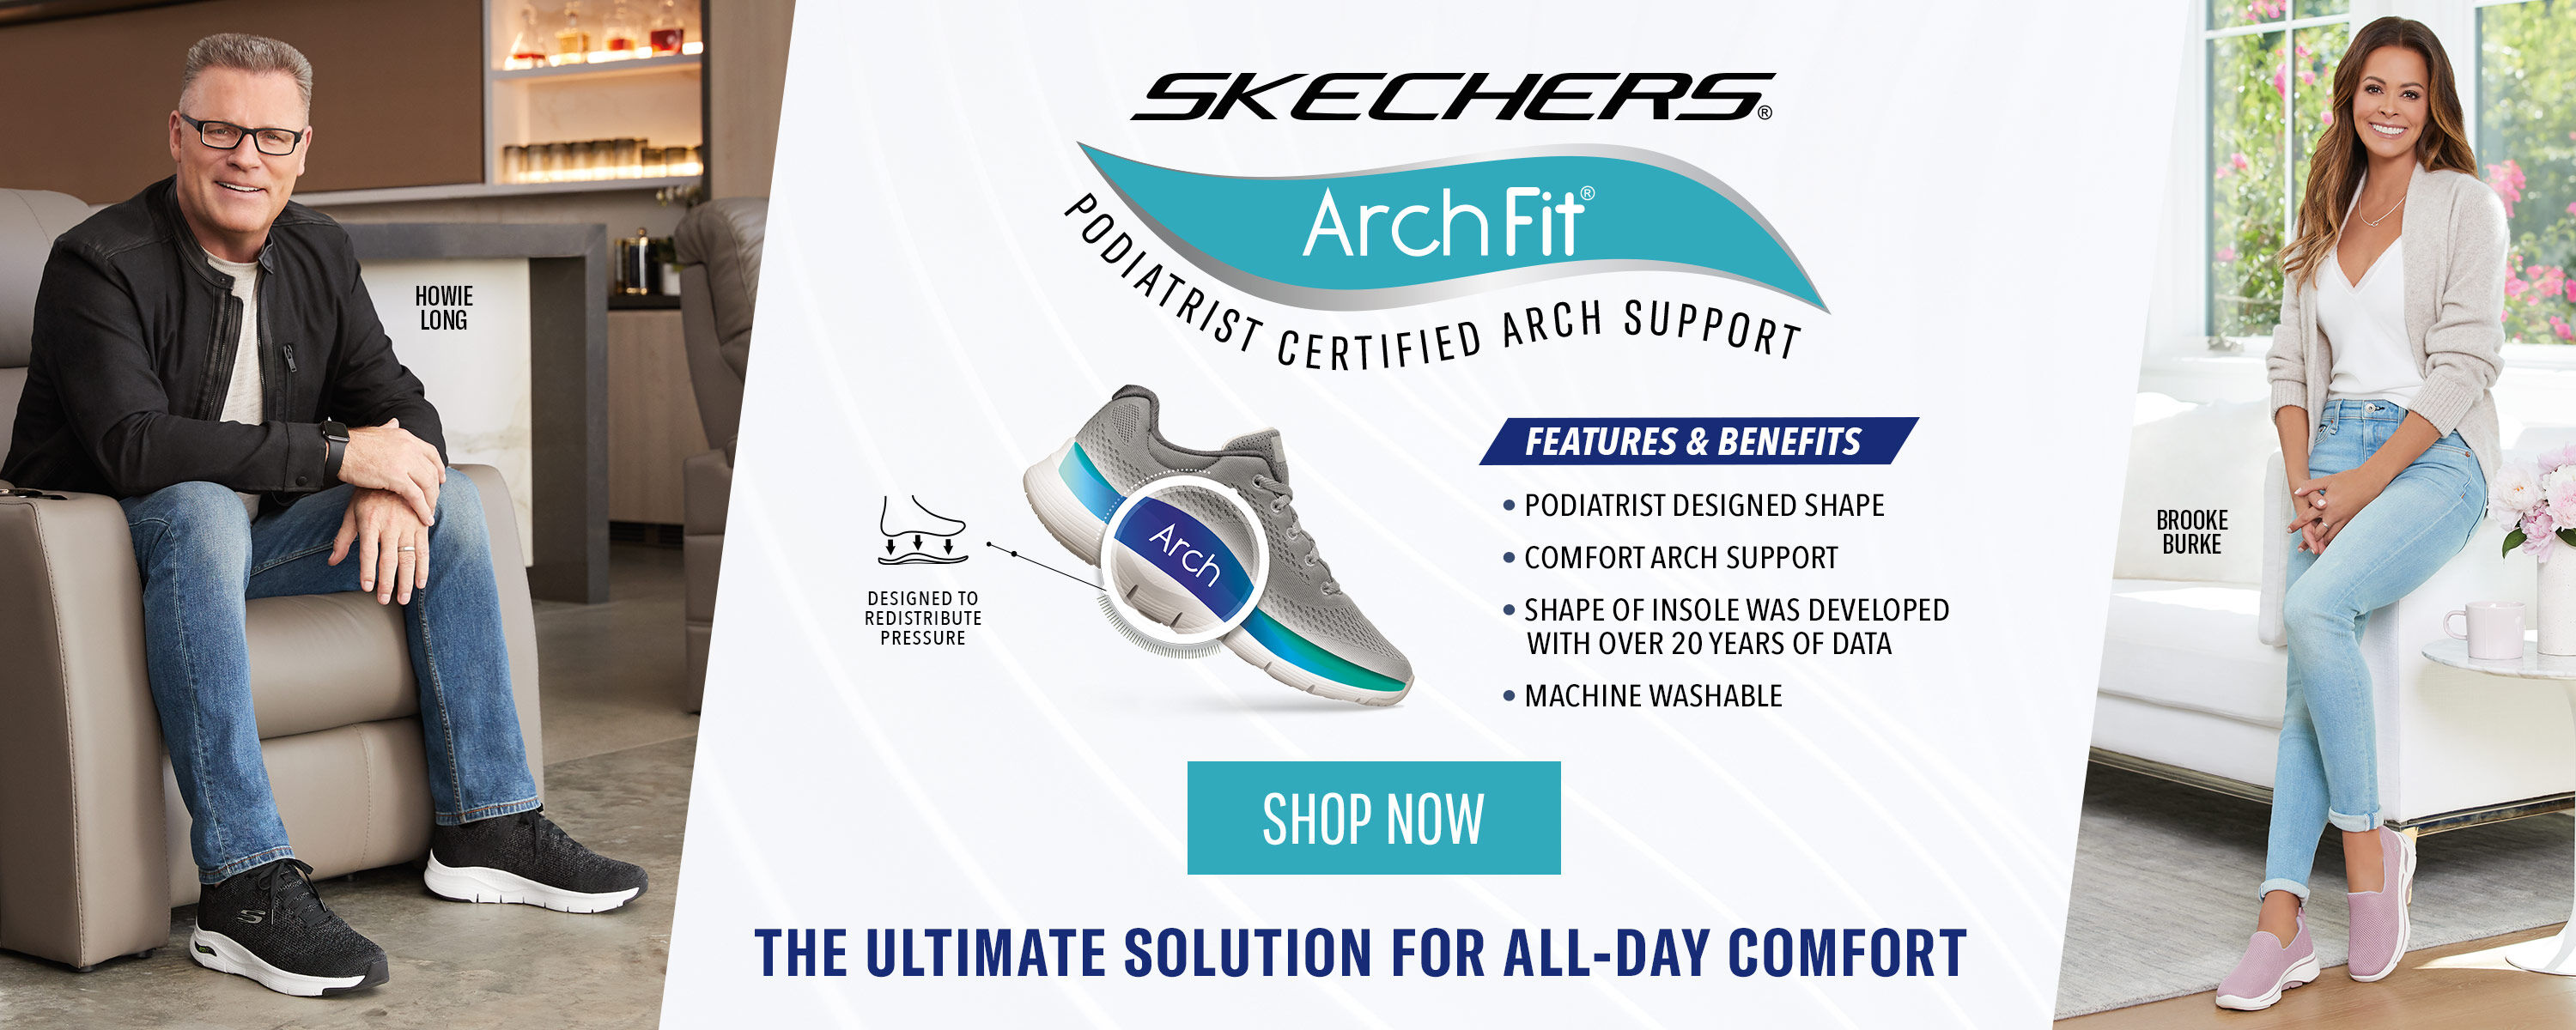 skechers sneakers outlet